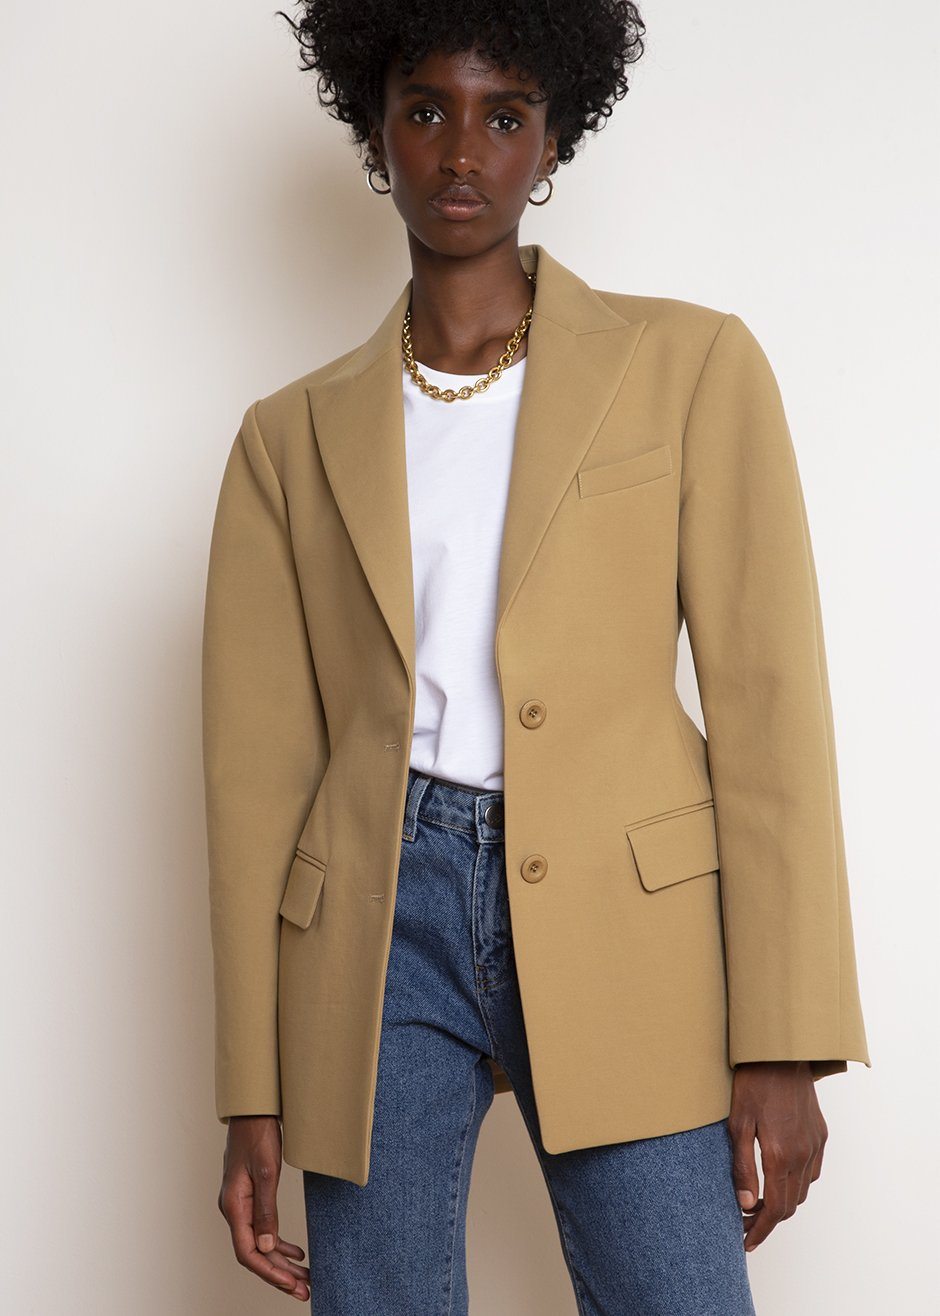 The Frankie Shop Collette Hourglass Blazer in Camel. 